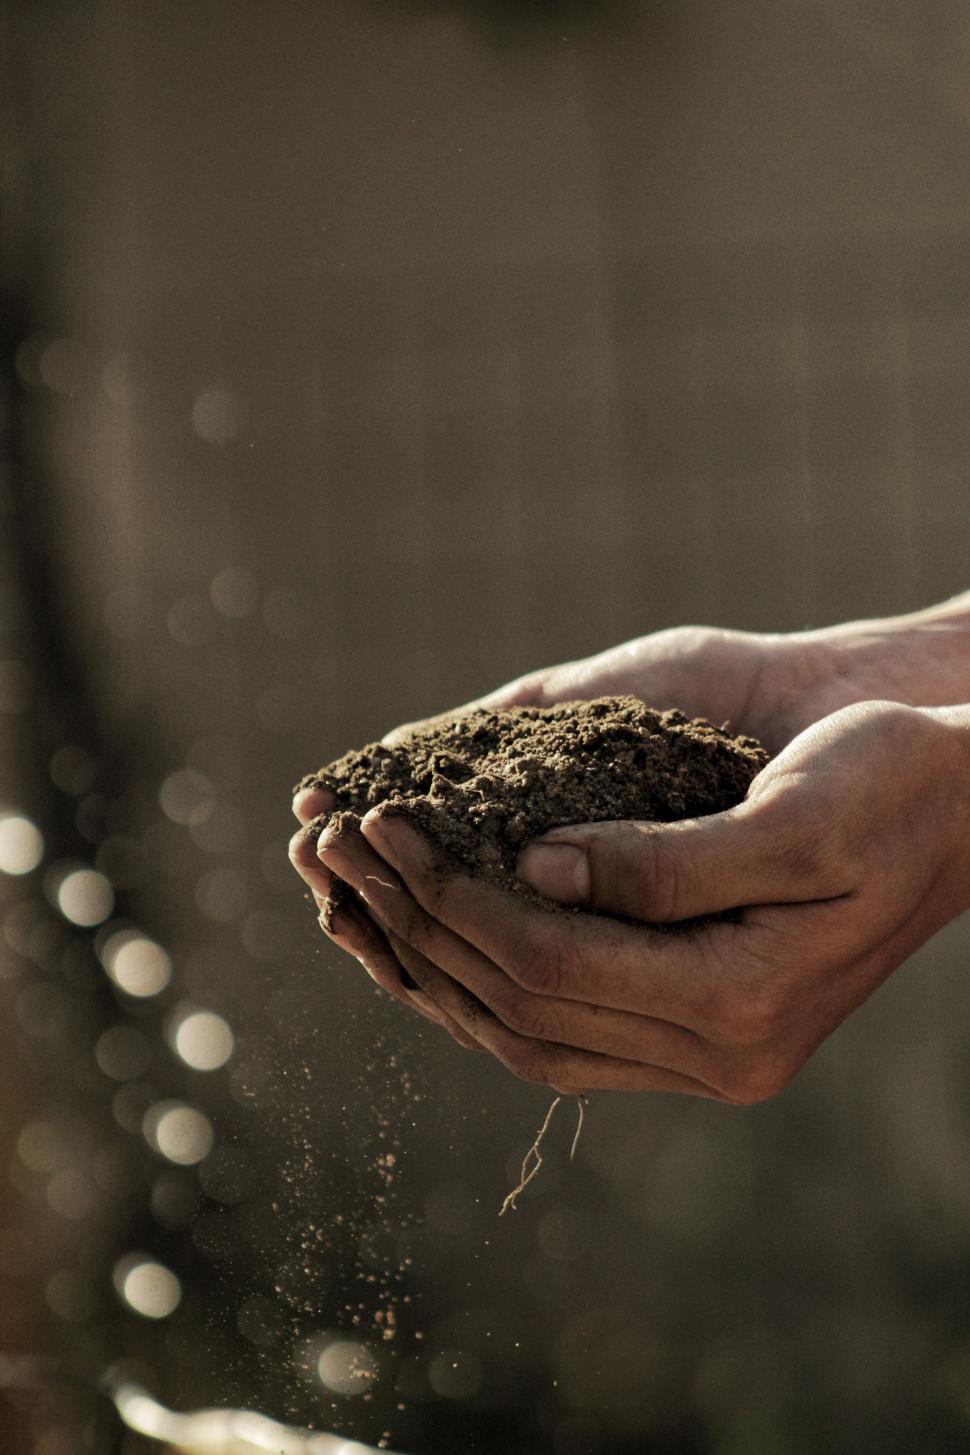 Free Image of Person Holding Dirt Ball 